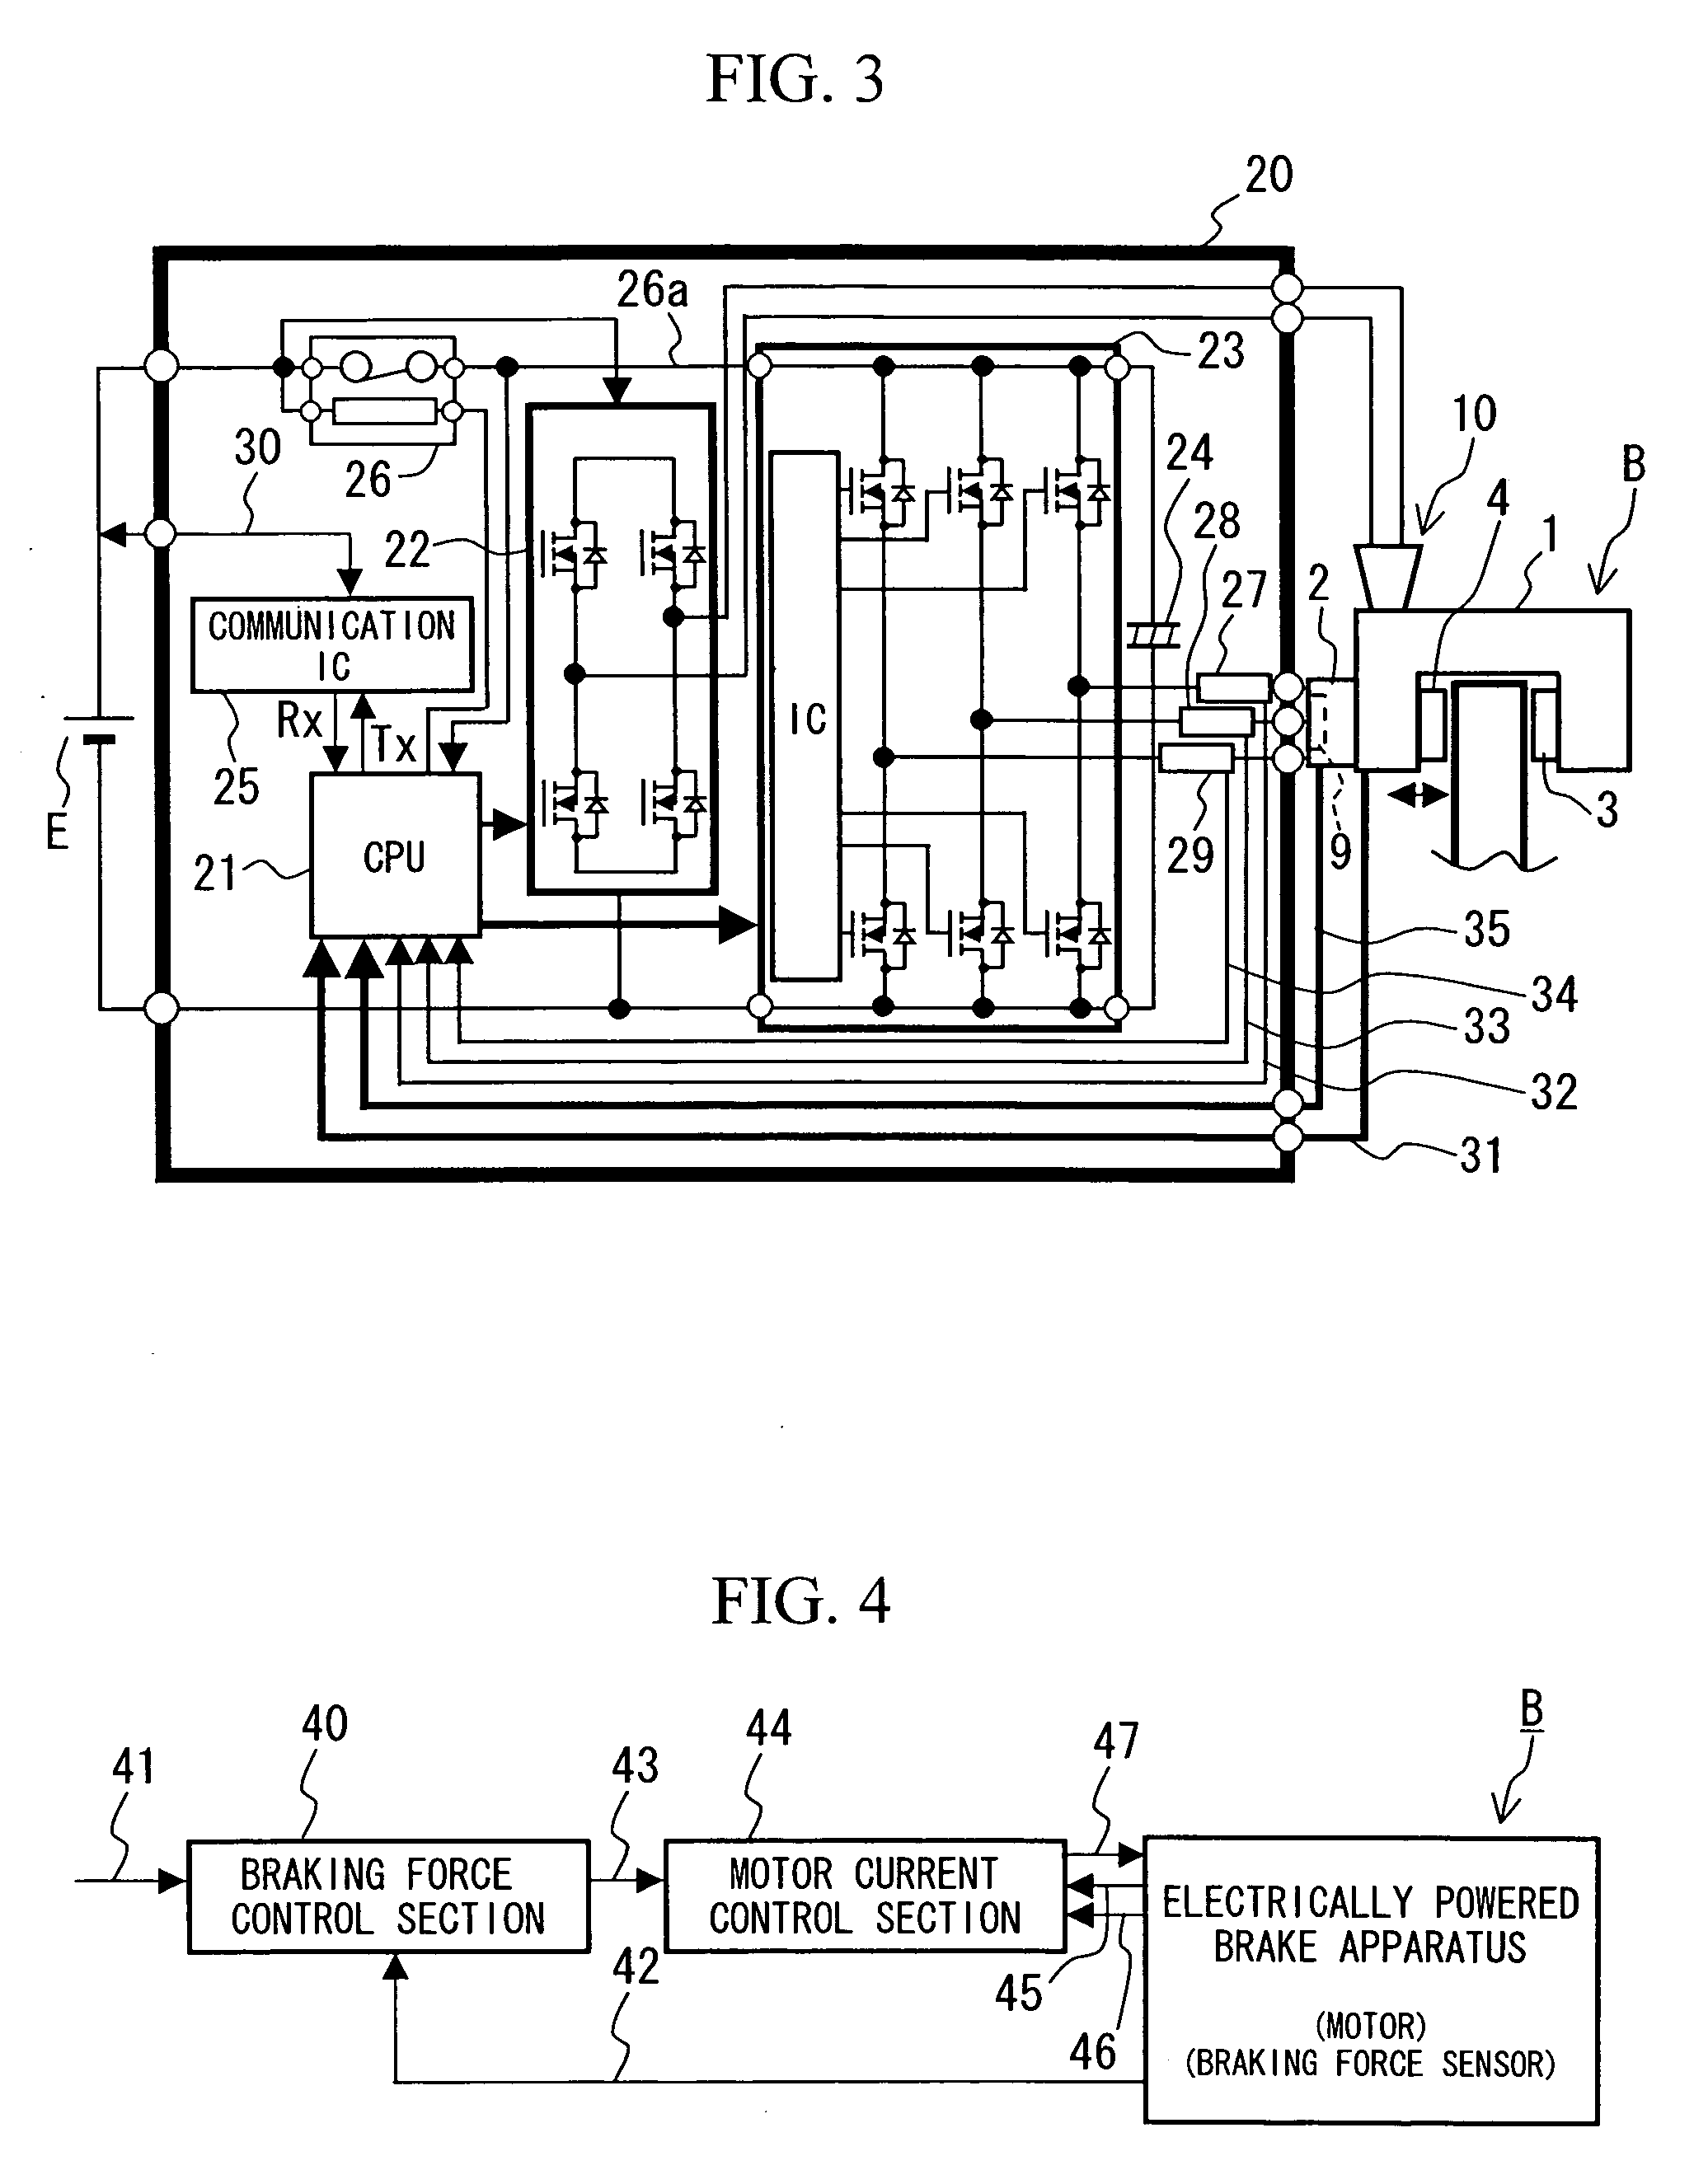 Electrically powered brake system and control unit for electrically powered brake system